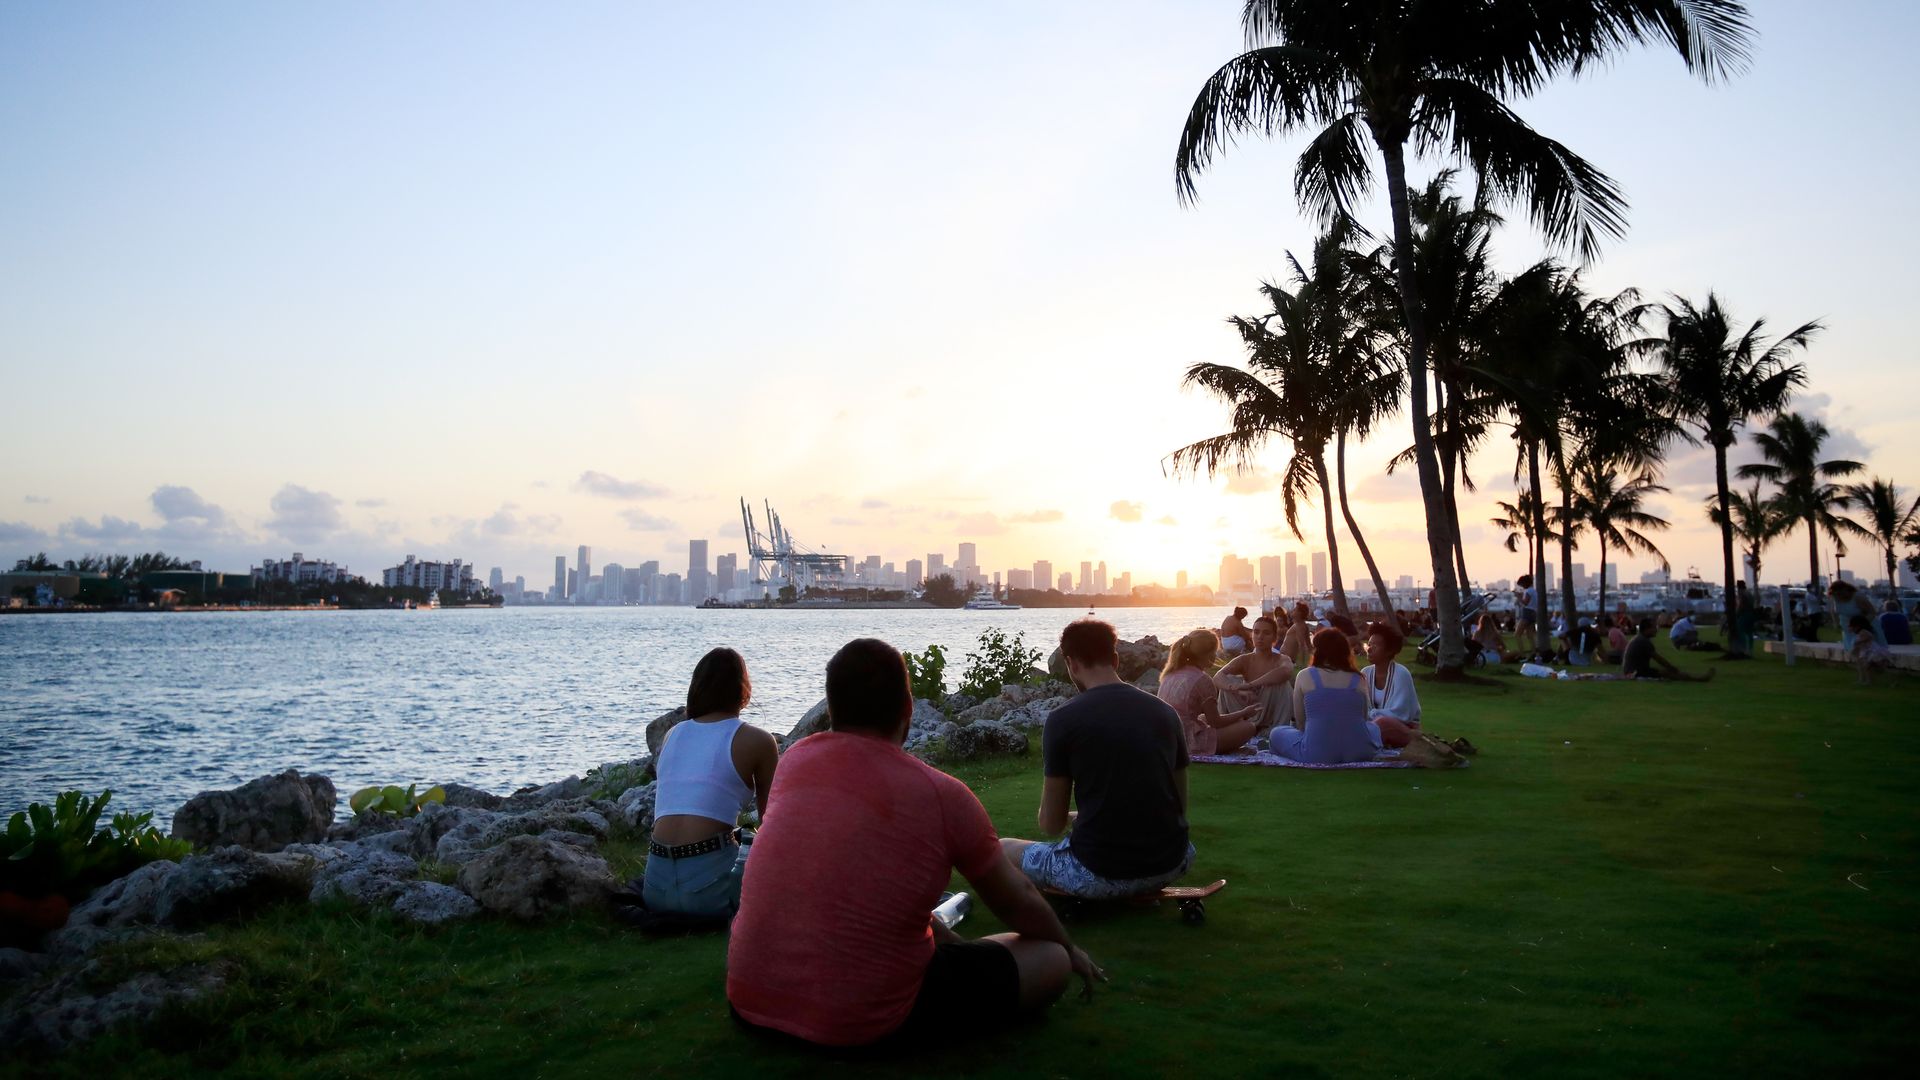 Parkgoers in South Beach watch the sunset by the water.